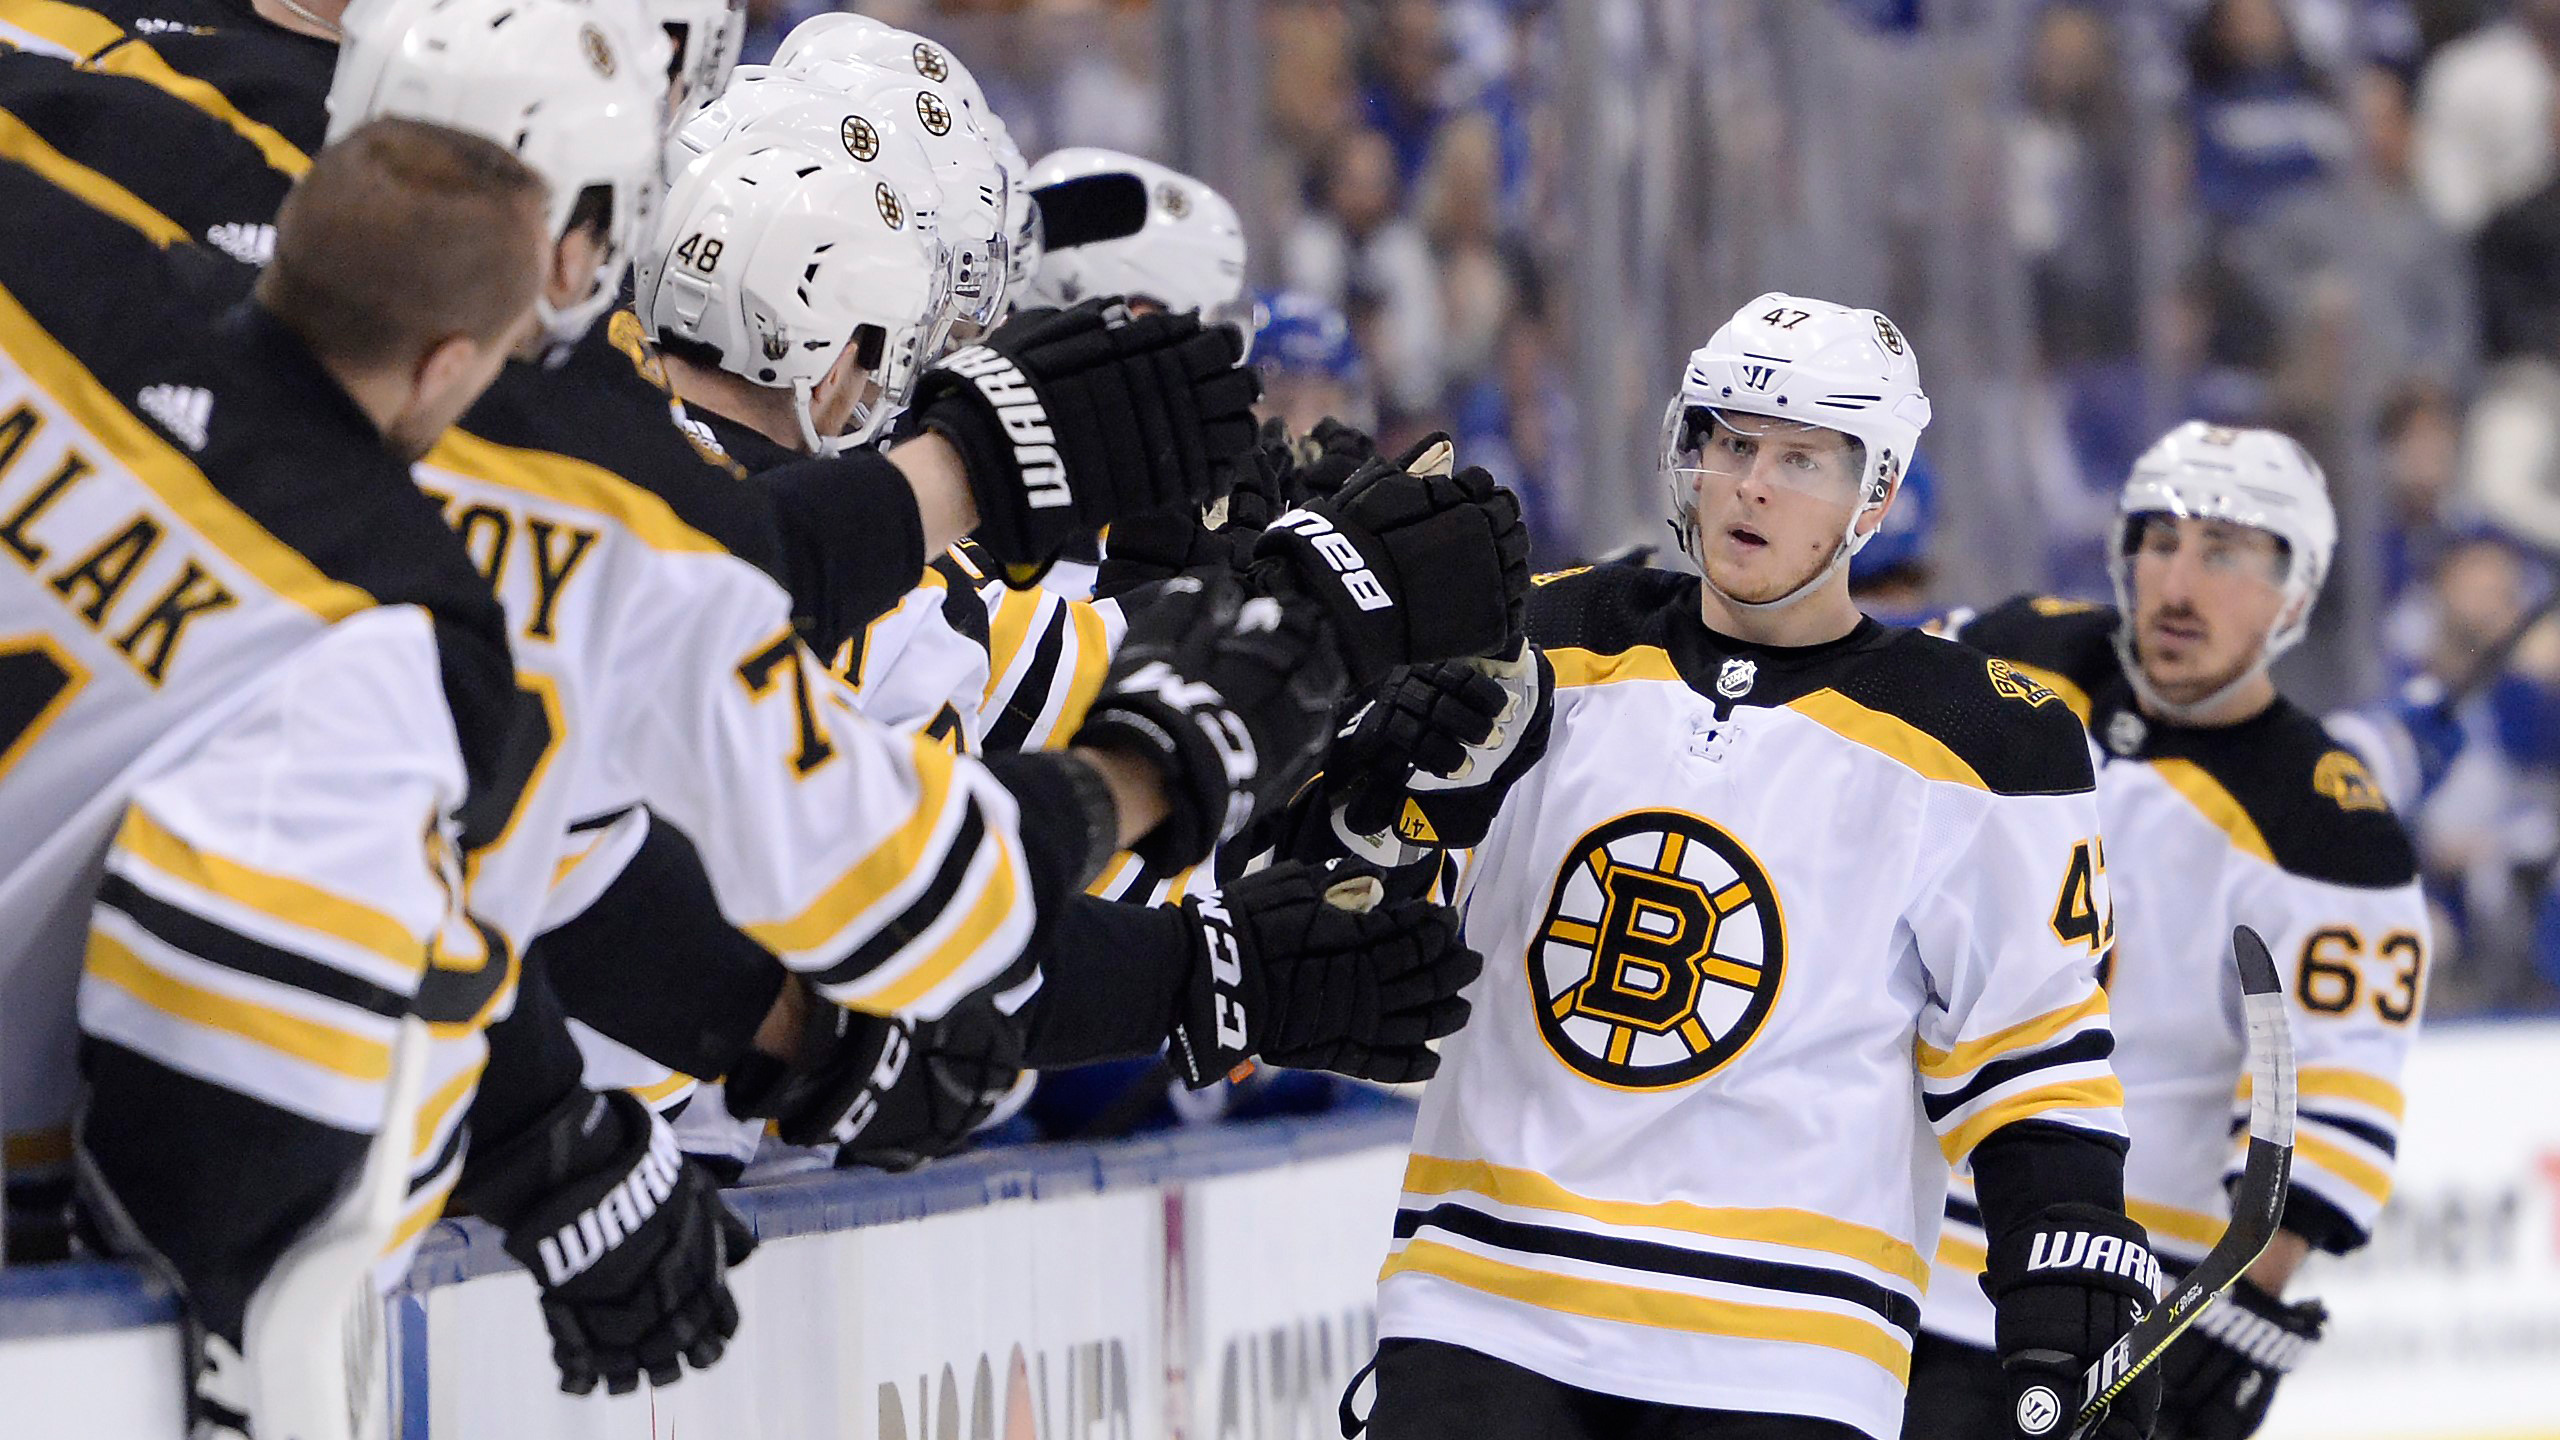 Stick a fork in'em they're......Oh, wait. Bruins won't go away quietly, and force Game 7